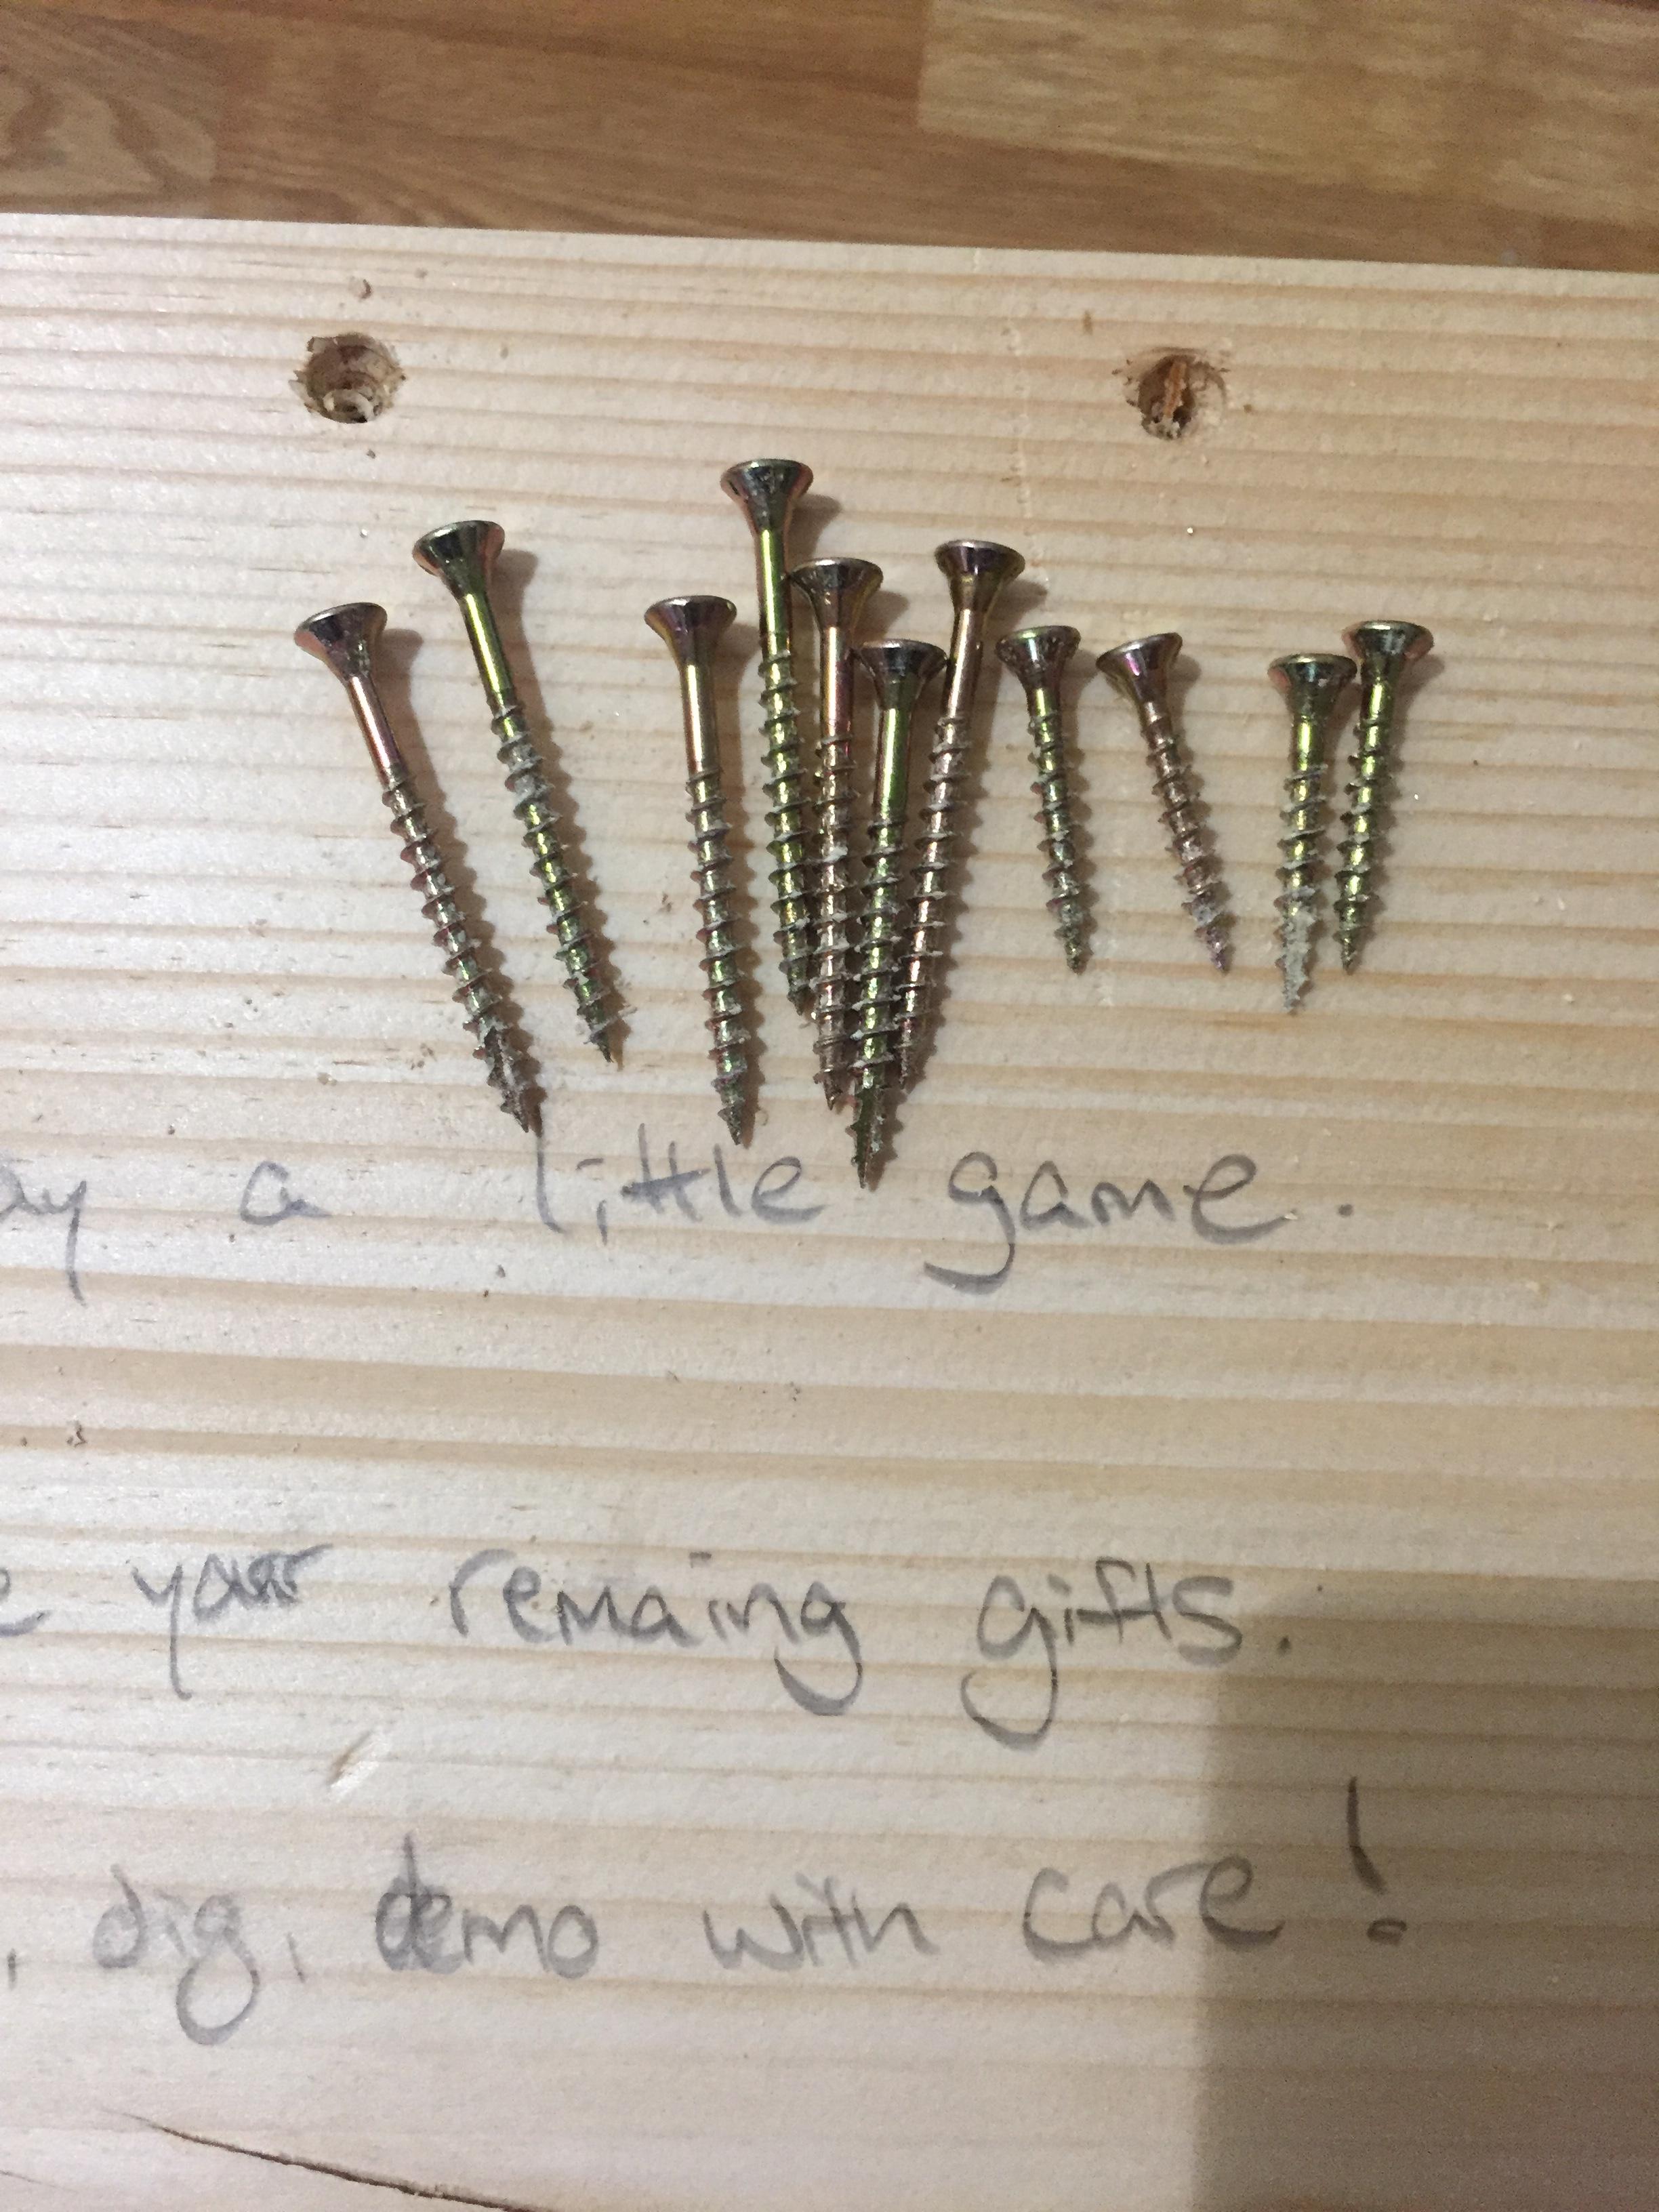 Got all the top screws out...